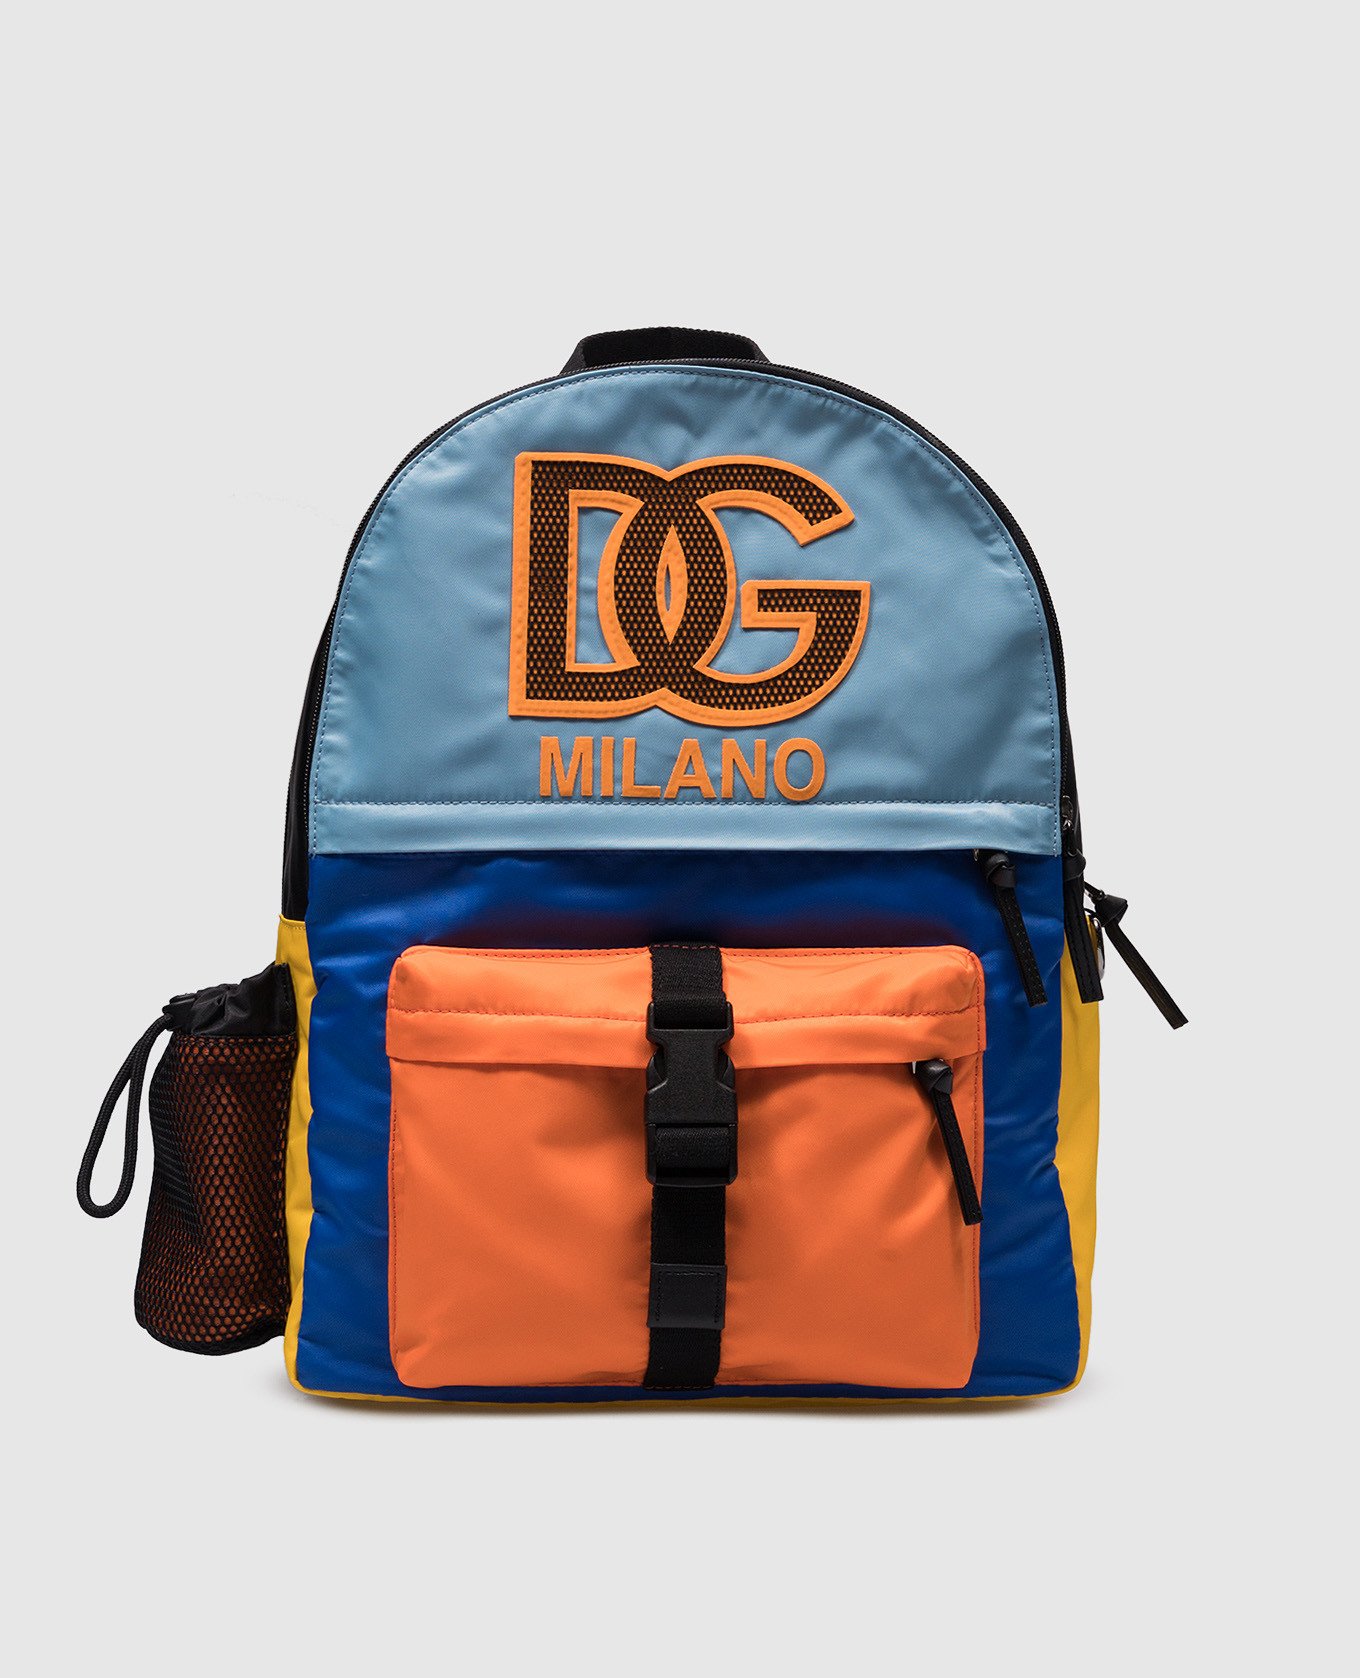 Children's backpack with logo